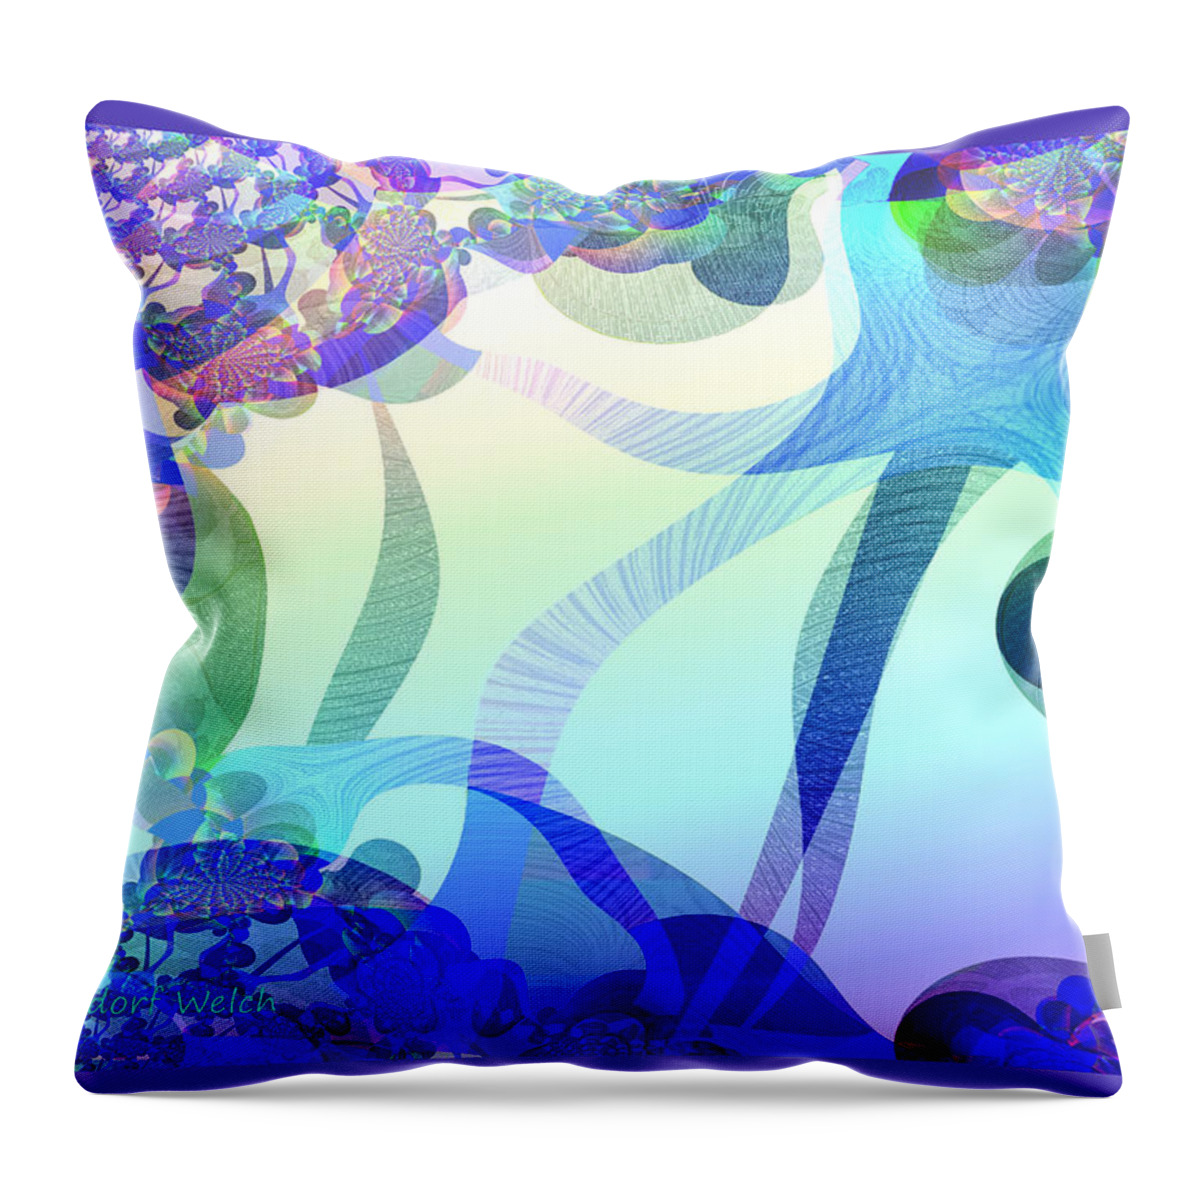 872 Throw Pillow featuring the painting 872 Spring dreaming by Irmgard Schoendorf Welch